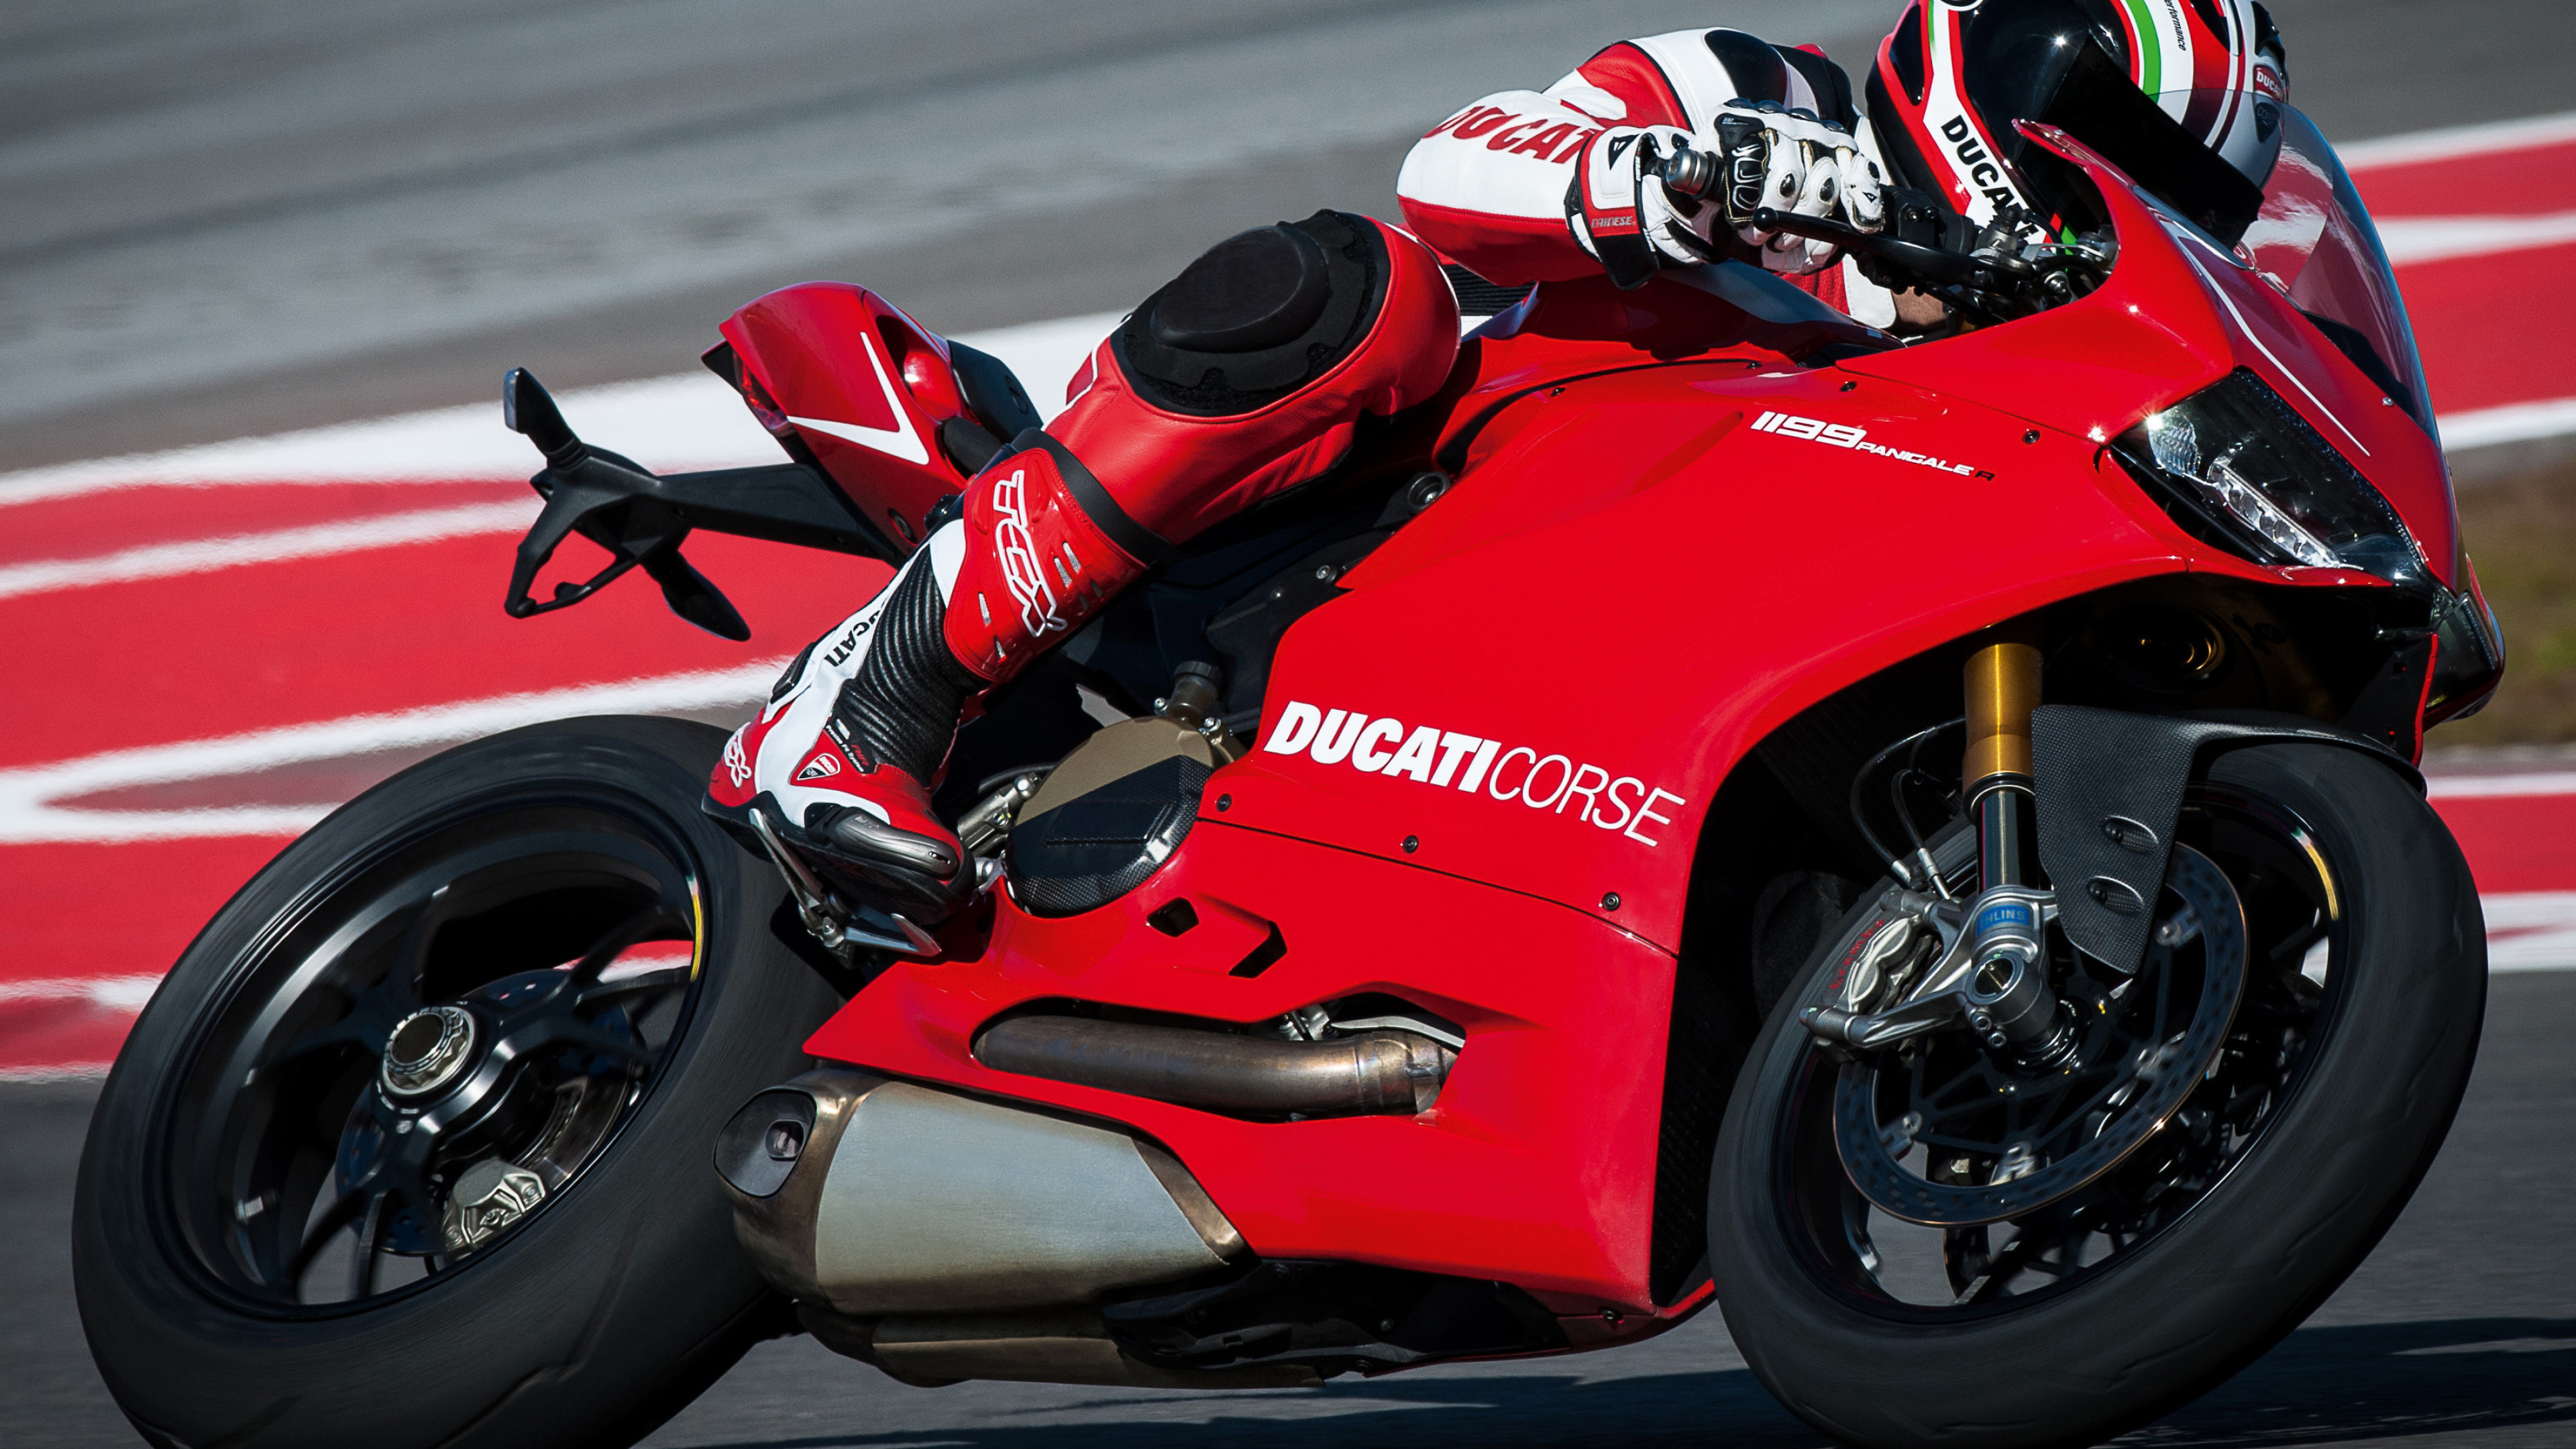 Superbike: Ducati 1199 Panigale of the Ducati Corse racing team at the MotoGP world tournament. 3840x2160 4K Background.